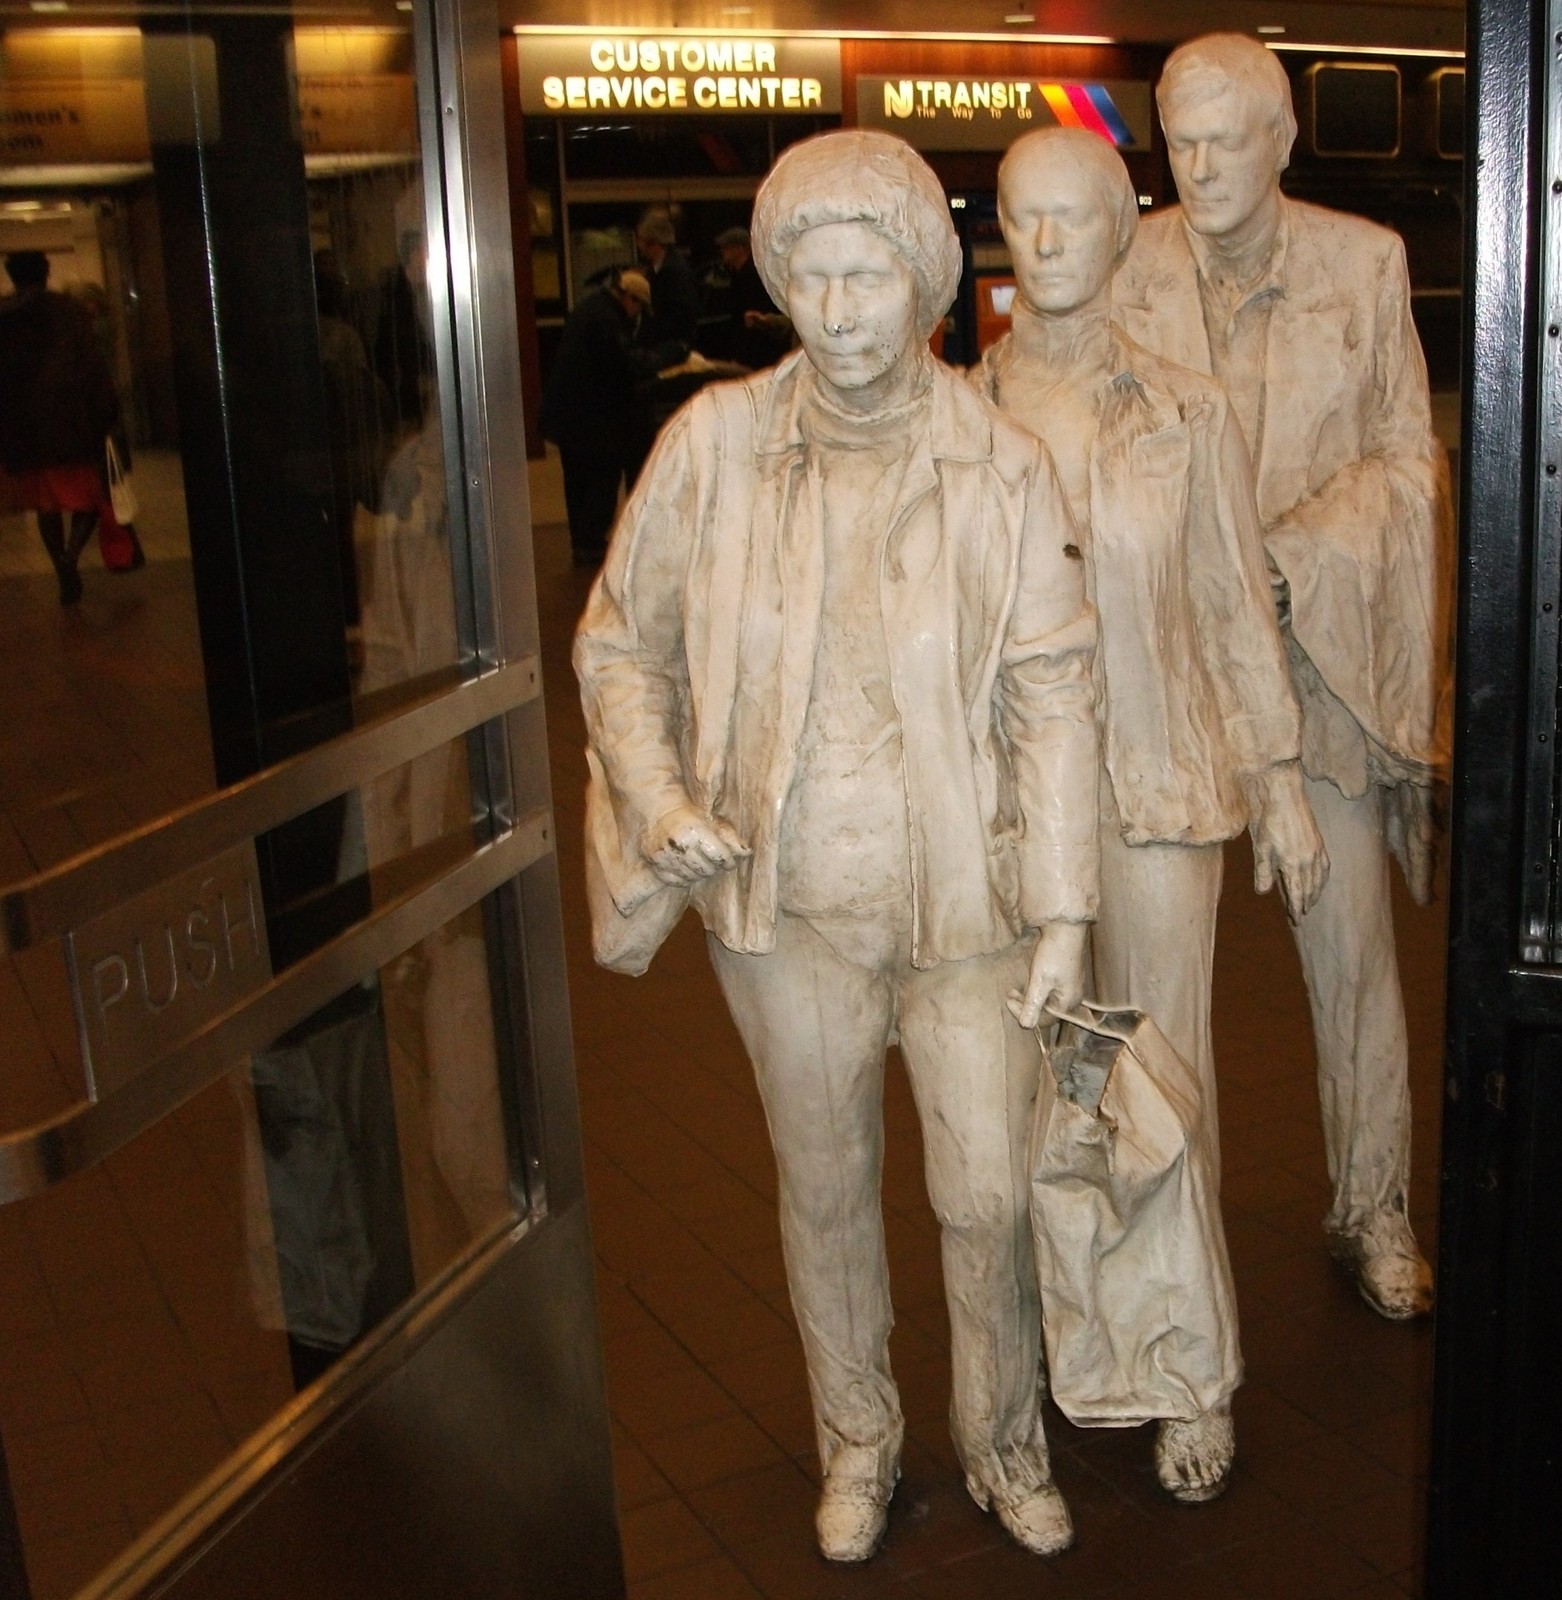 George Segal  The Commuters, 1980  Bronze, white patina  Bus Station at 8th Avenue, Manhattan, New York, USA